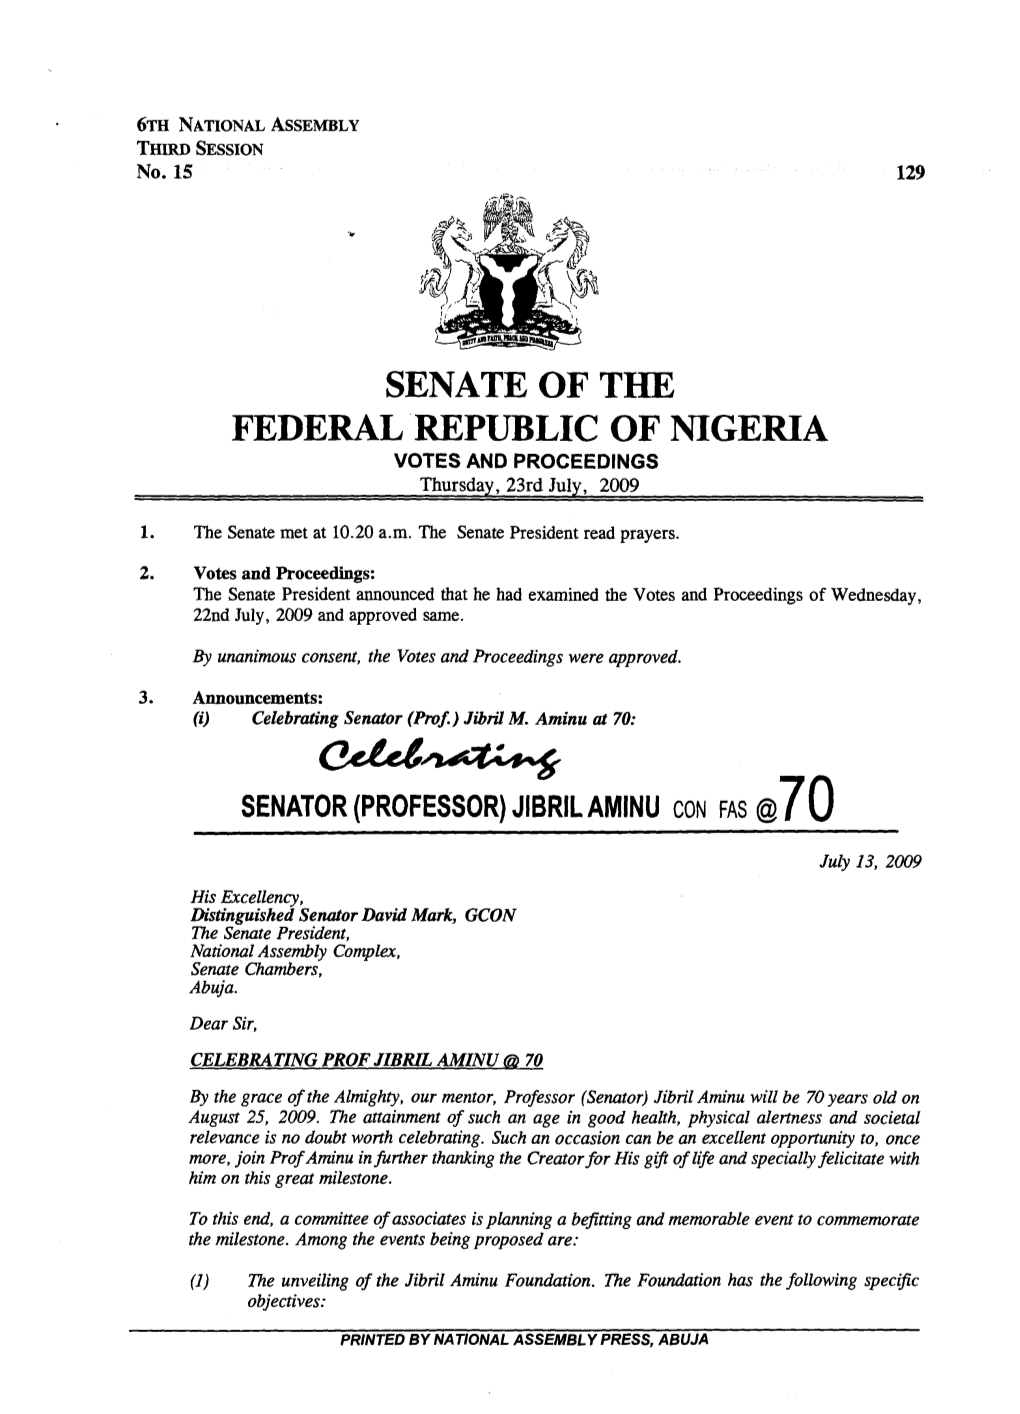 FEDERAL REPUBLIC of NIGERIA VOTES and PROCEEDINGS Thursday, 23Rd July, 2009